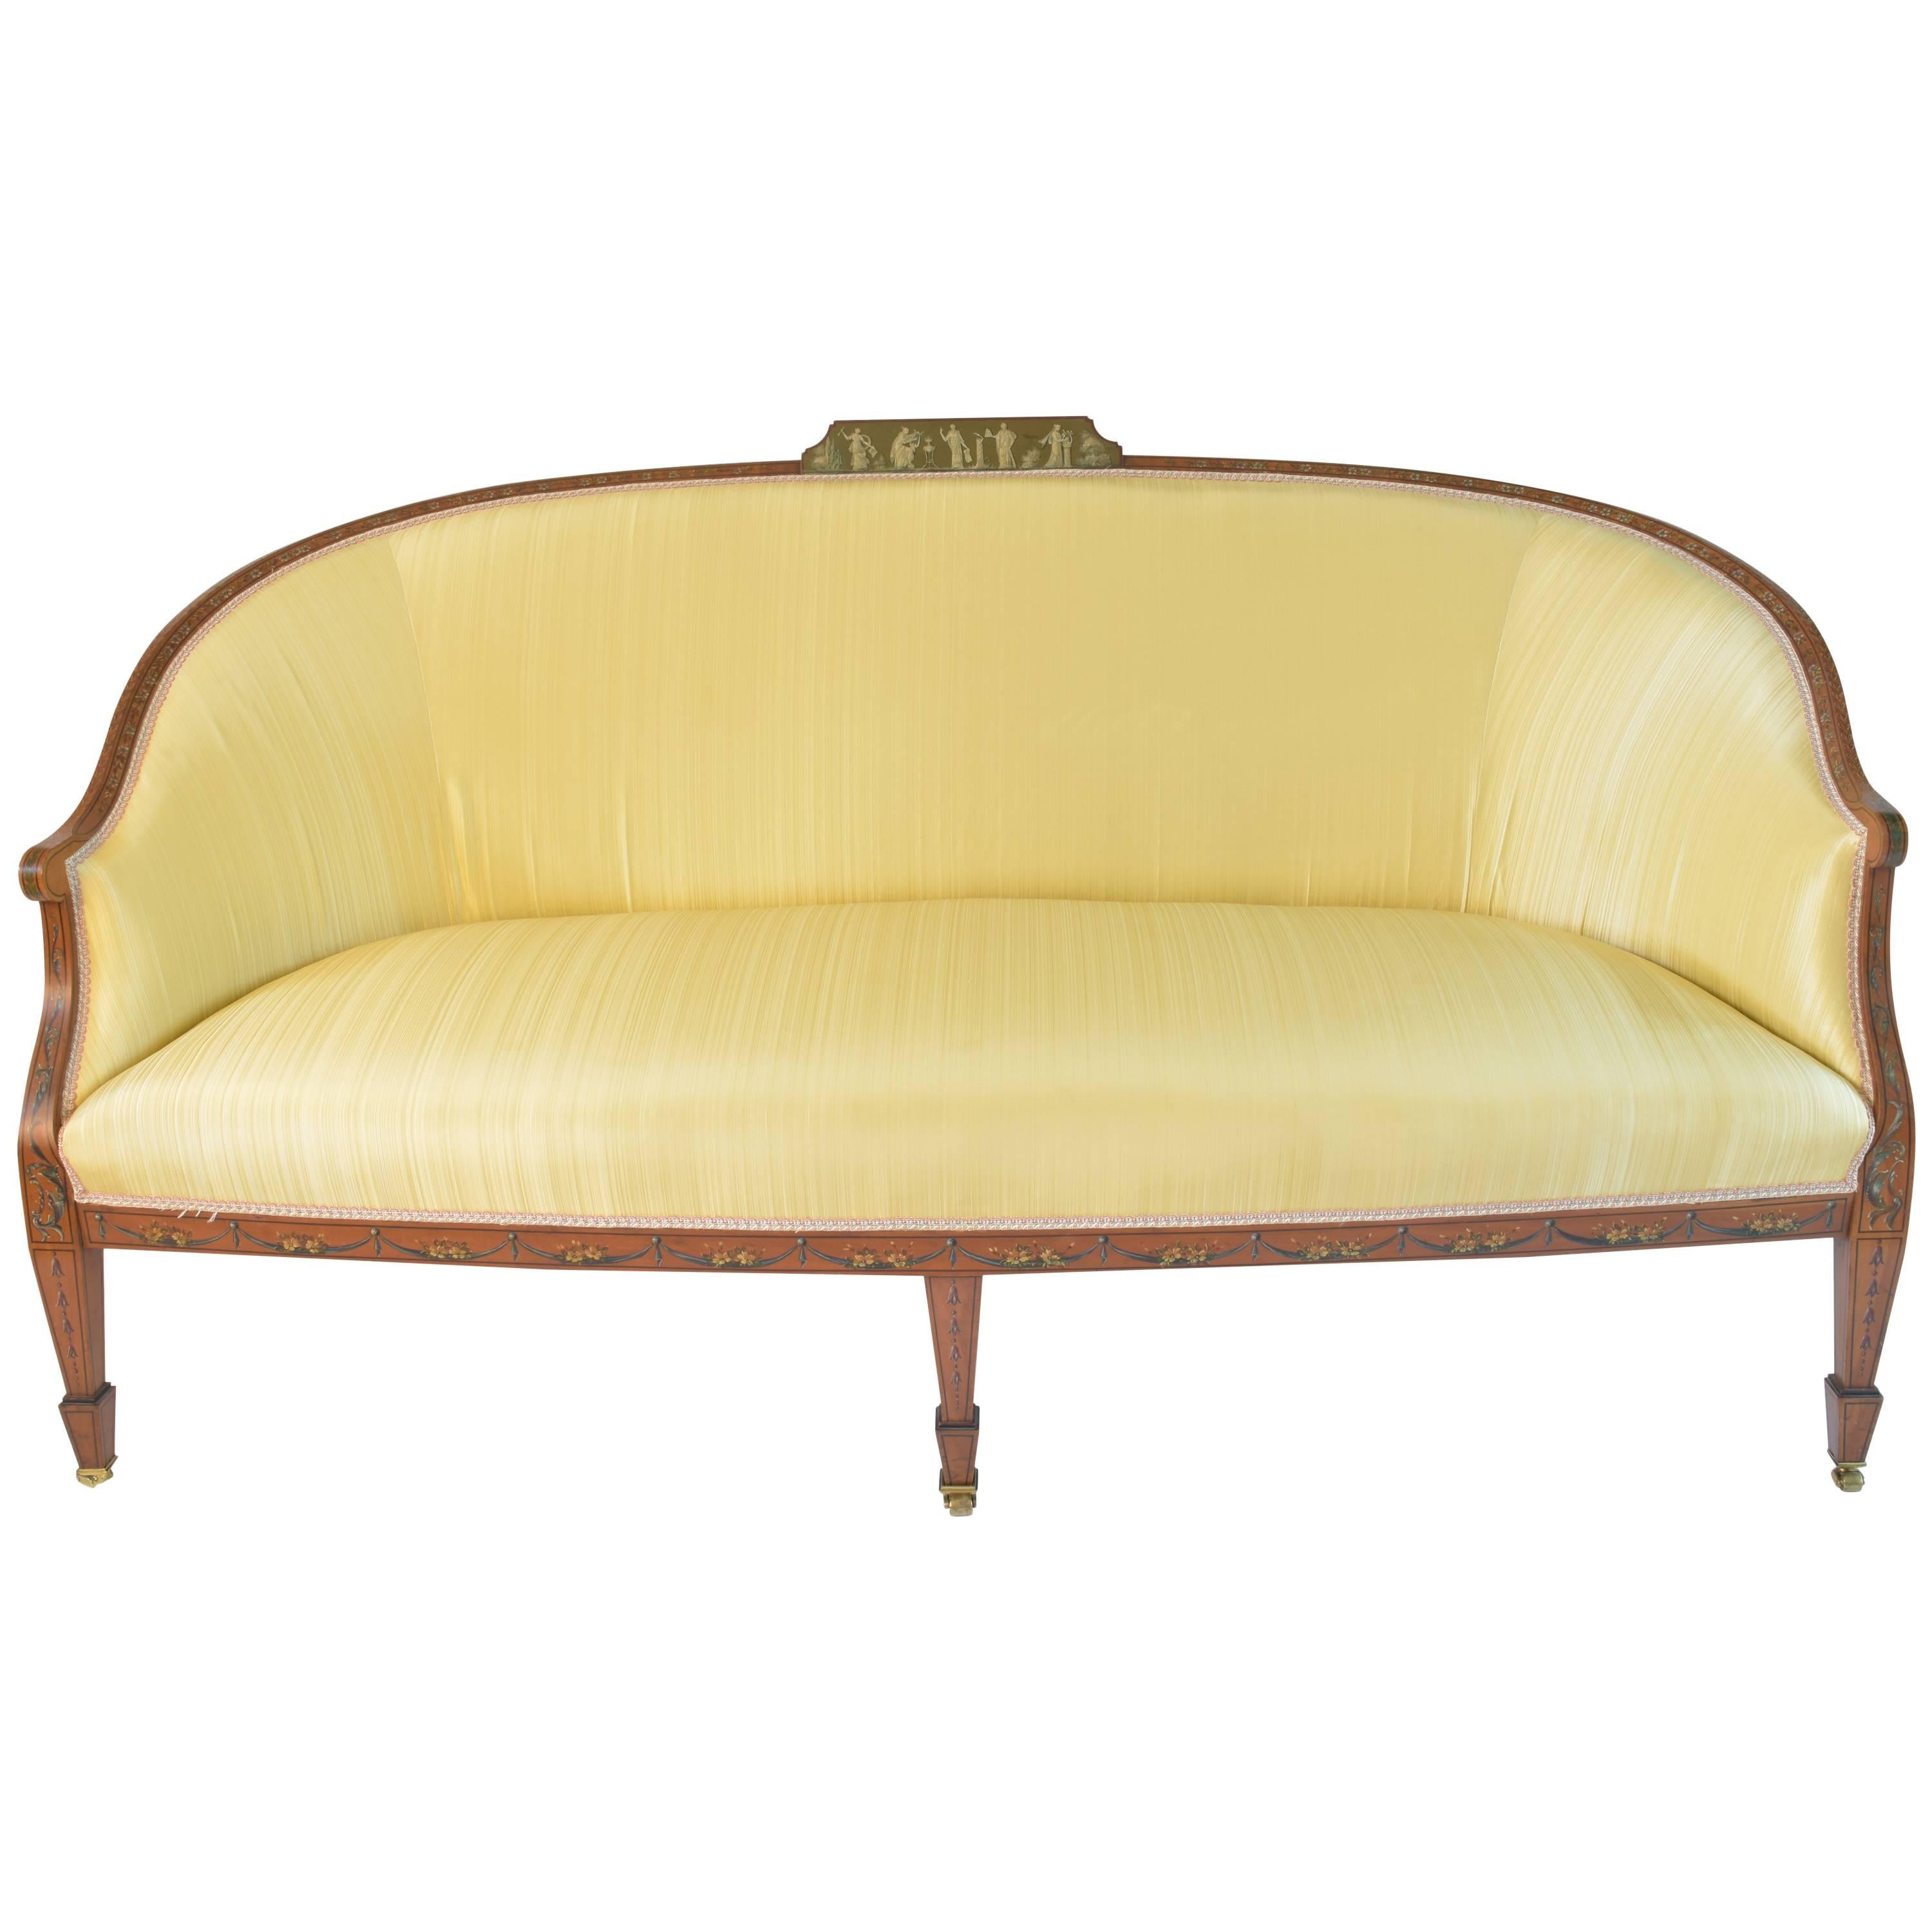 English Sheraton Settee with Painted Neoclassical Figural Detail, circa 1870